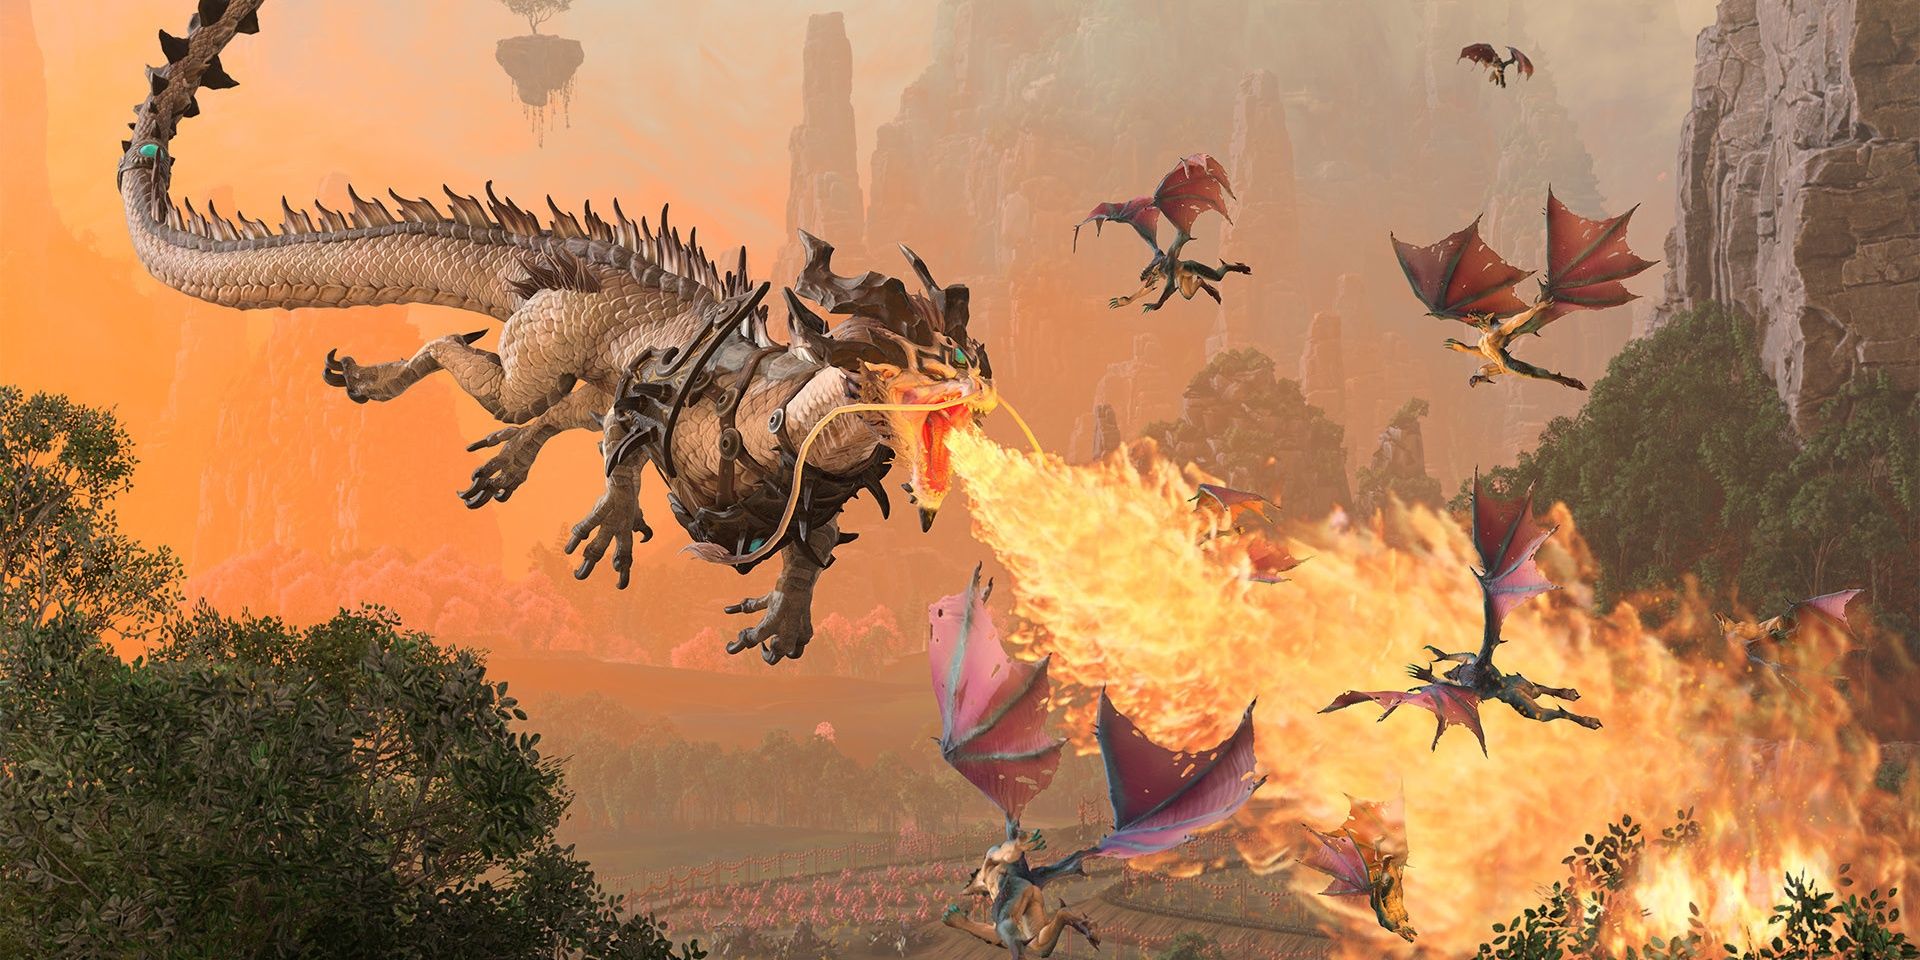 A dragon breathing fire at smaller dragons in Total War: Warhammer 3